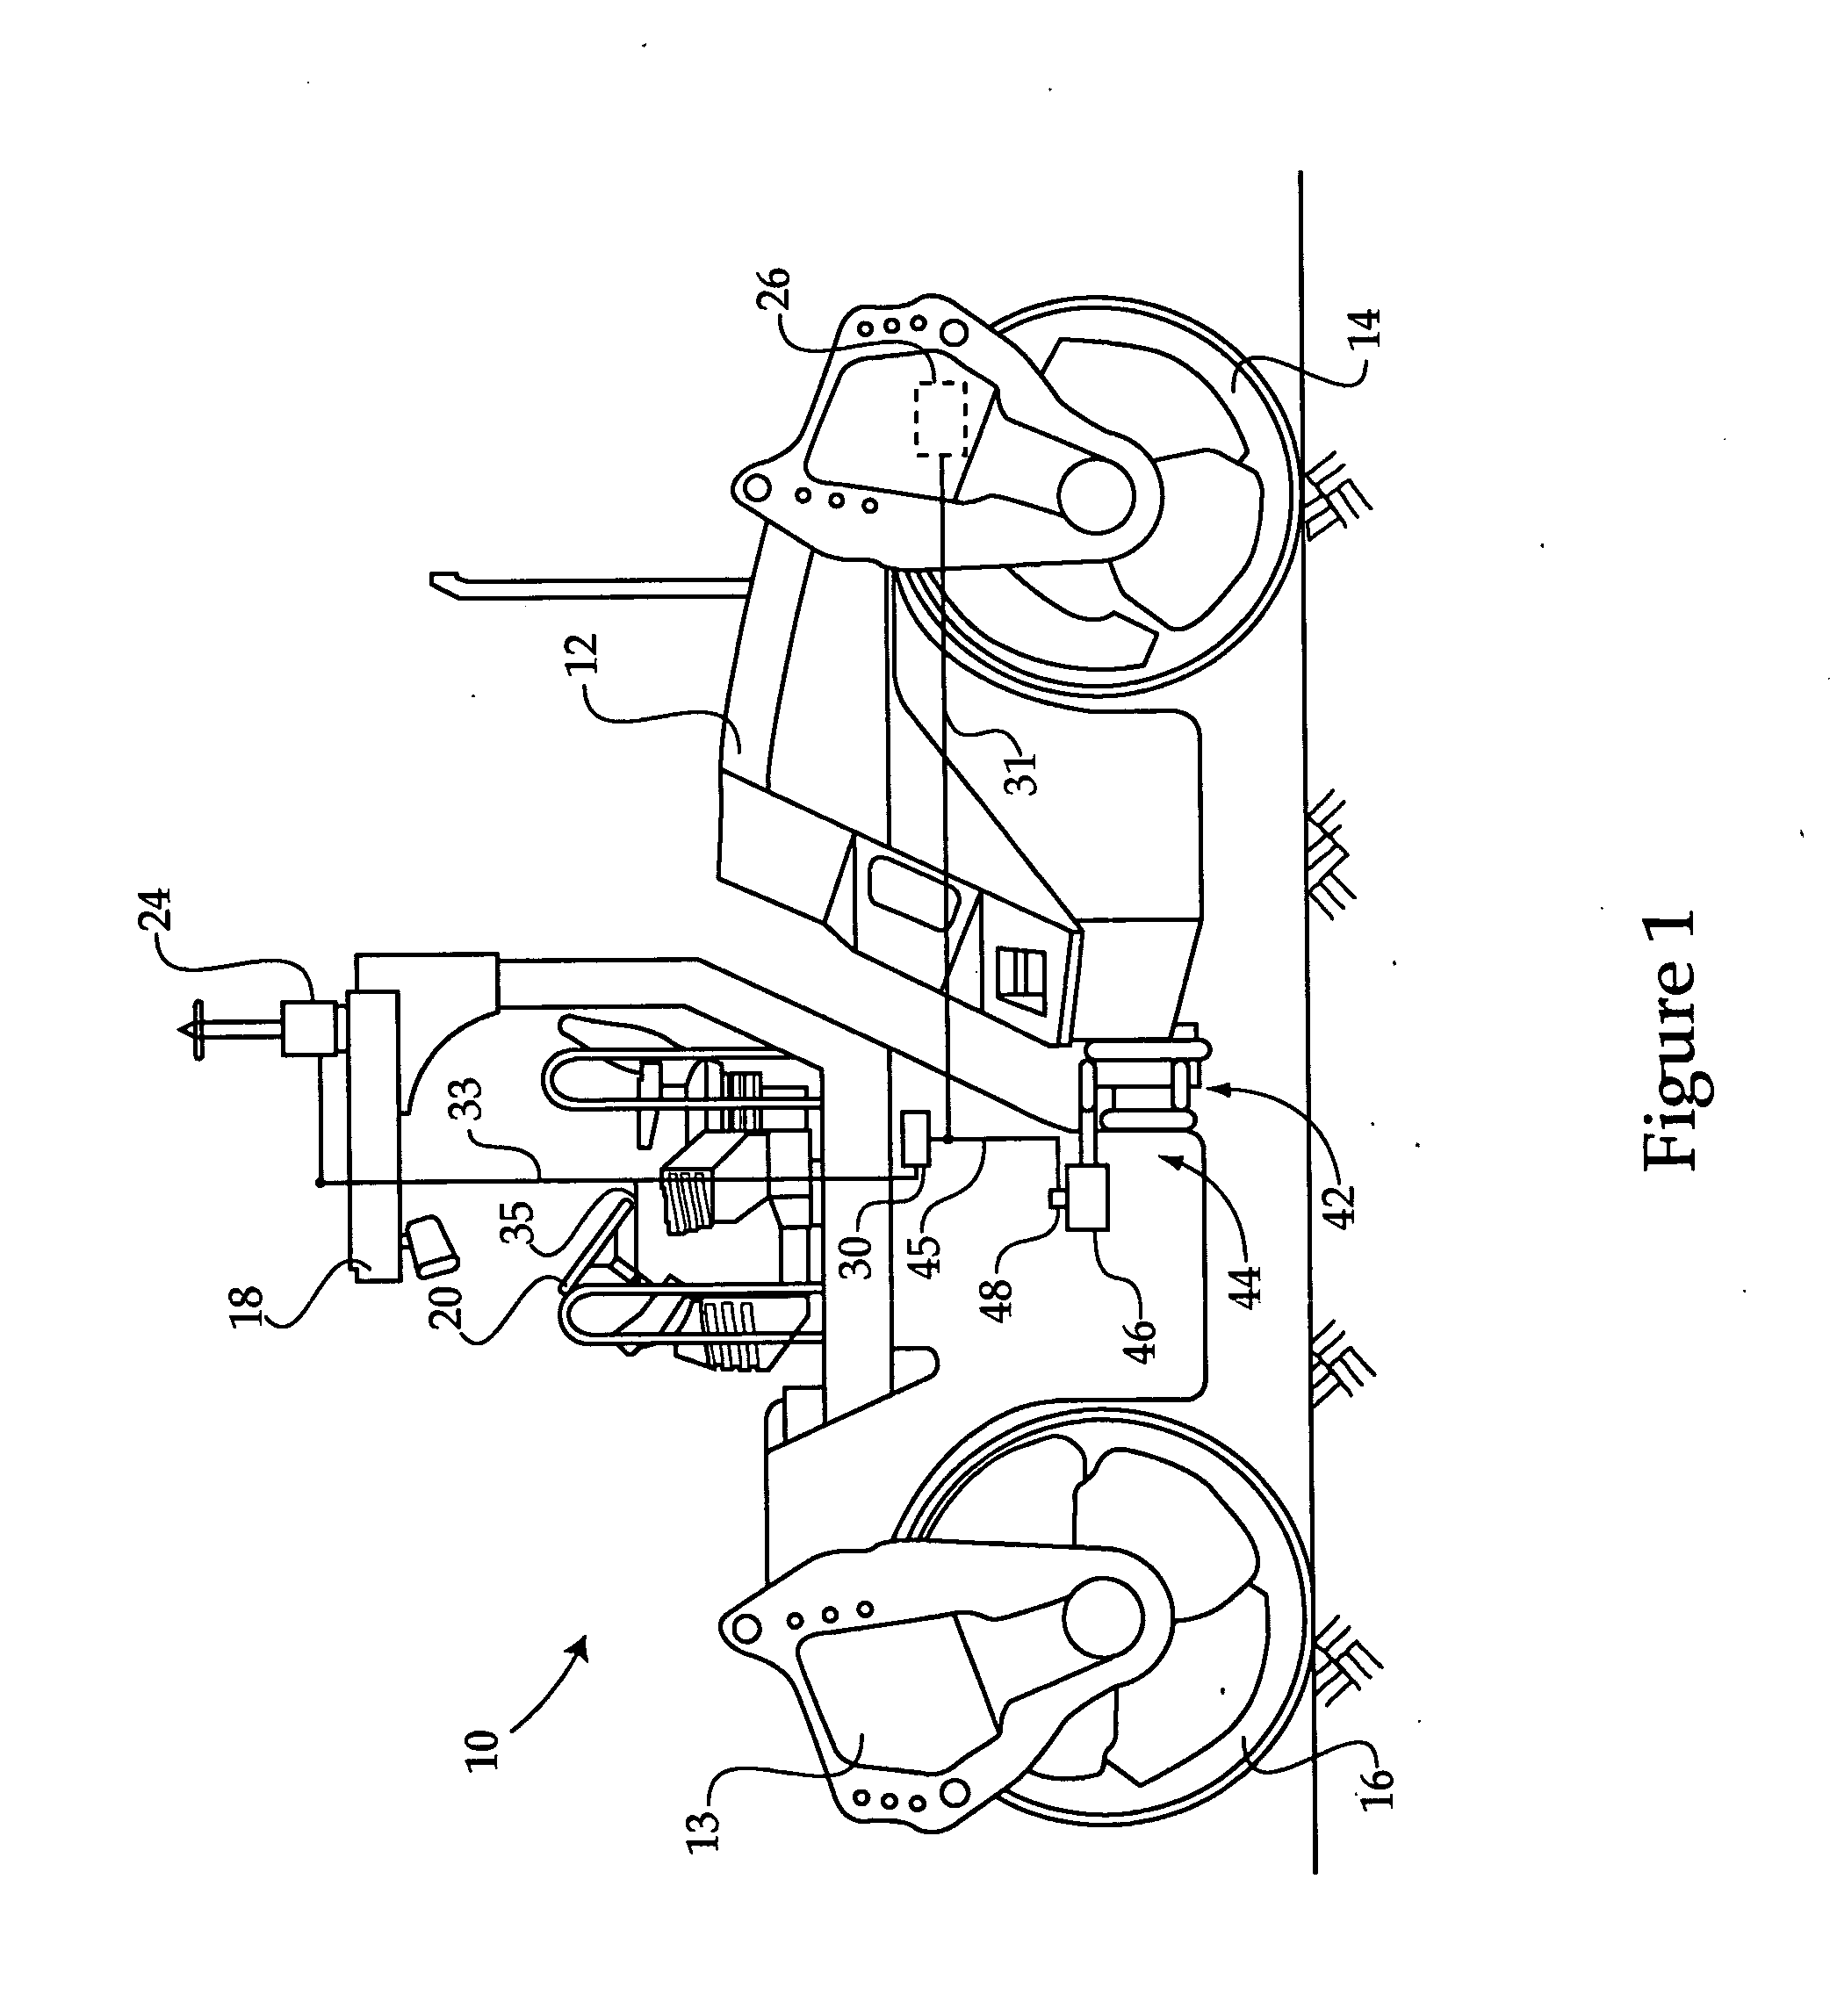 Method of operating a compactor machine via path planning based on compaction state data and mapping information